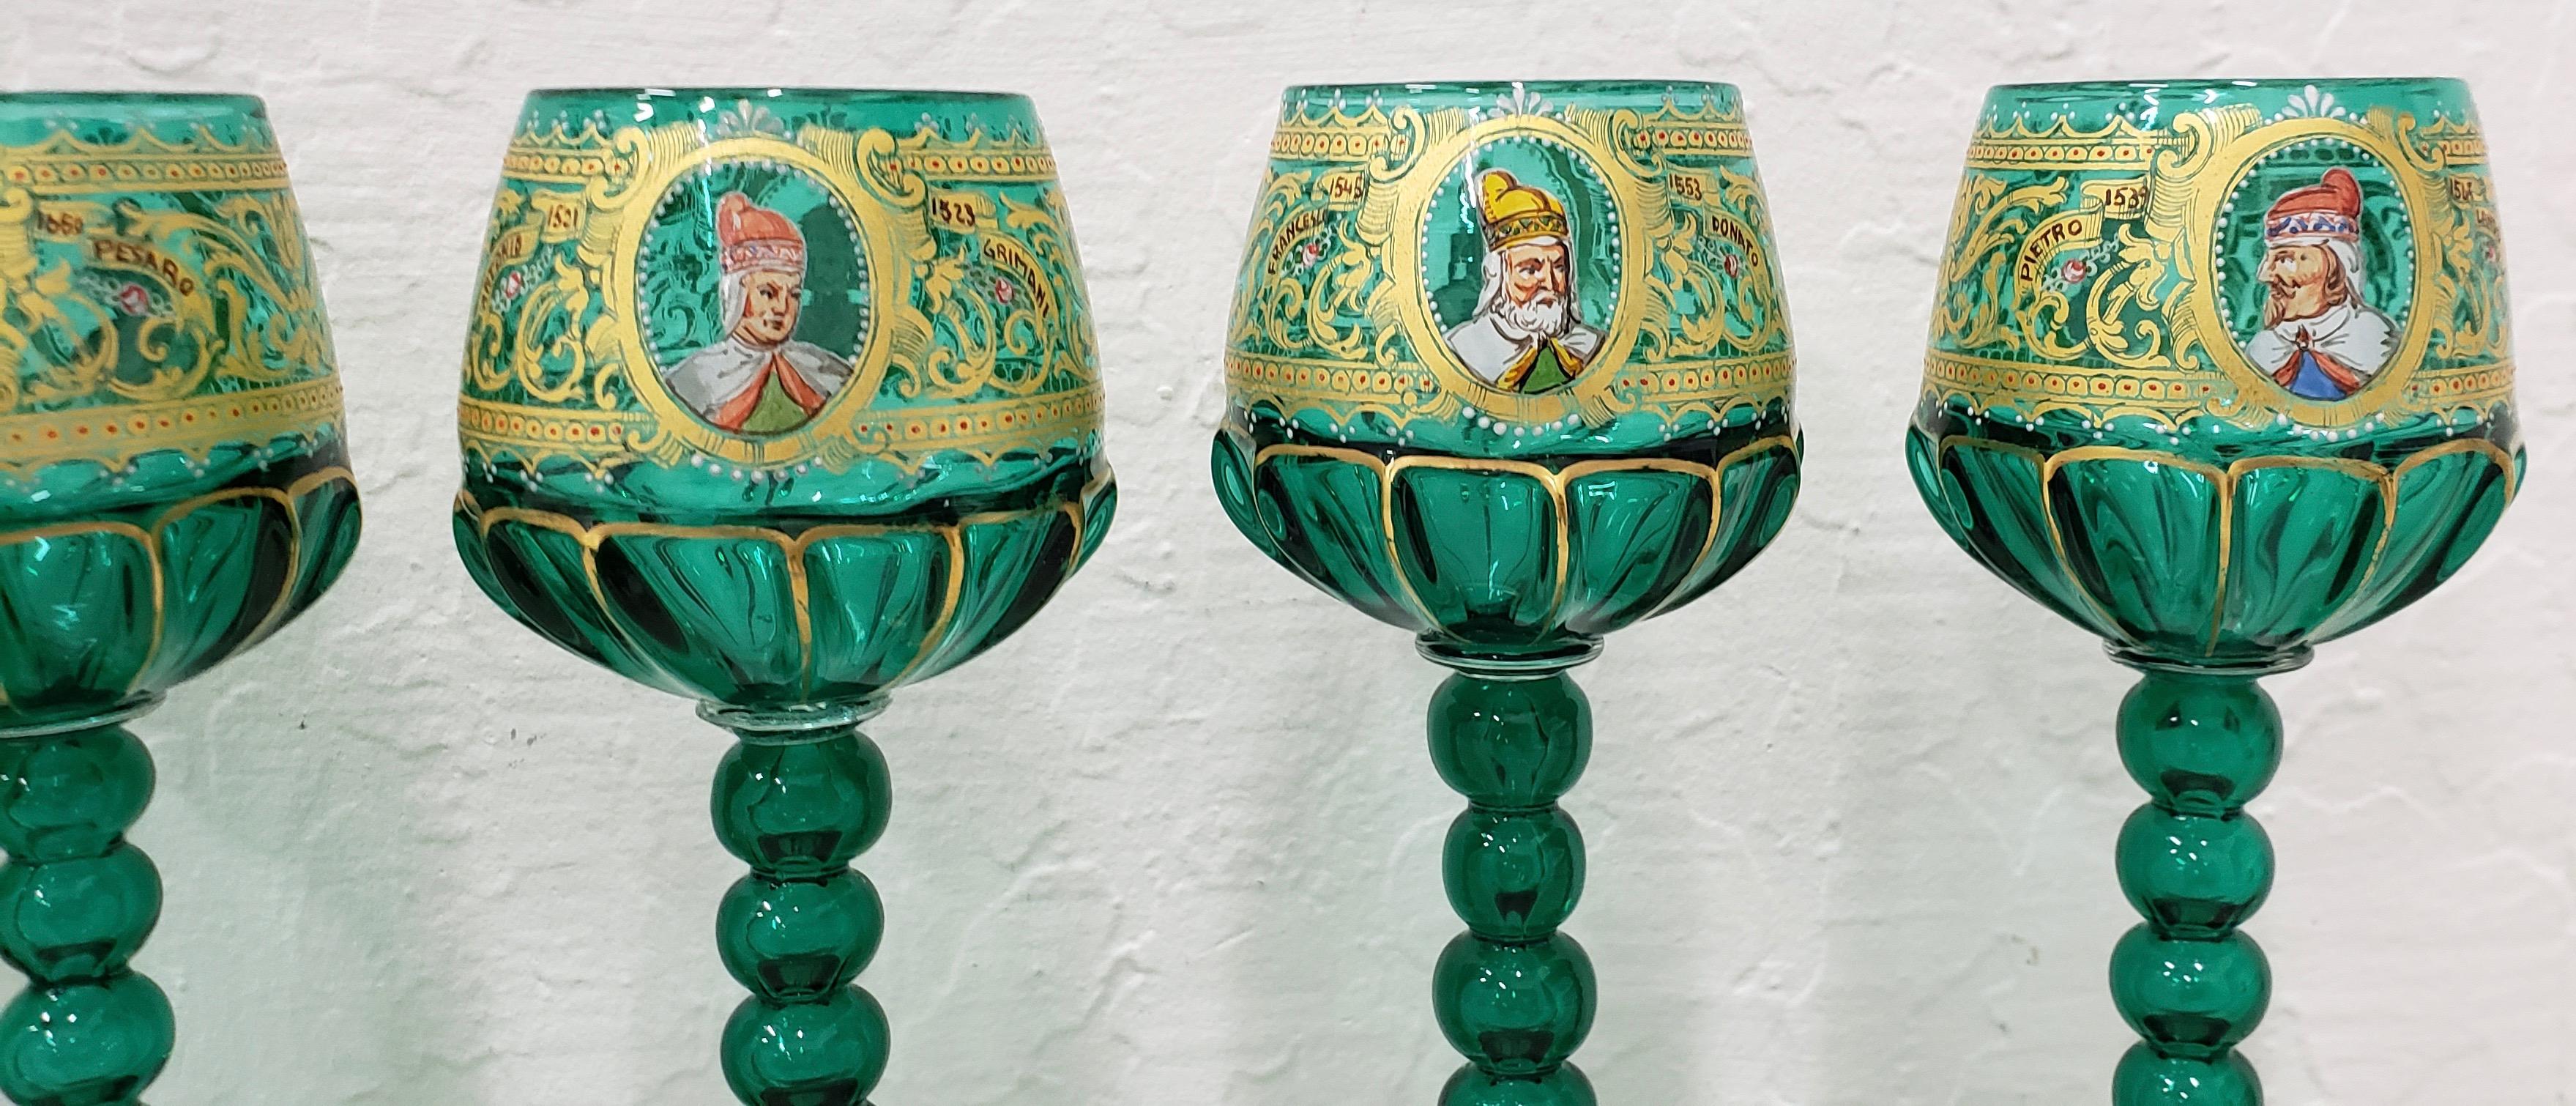 Hand-Painted Set of 9 Salviati Murano Wine Glasses Hand Painted with Notable Venetian Figures